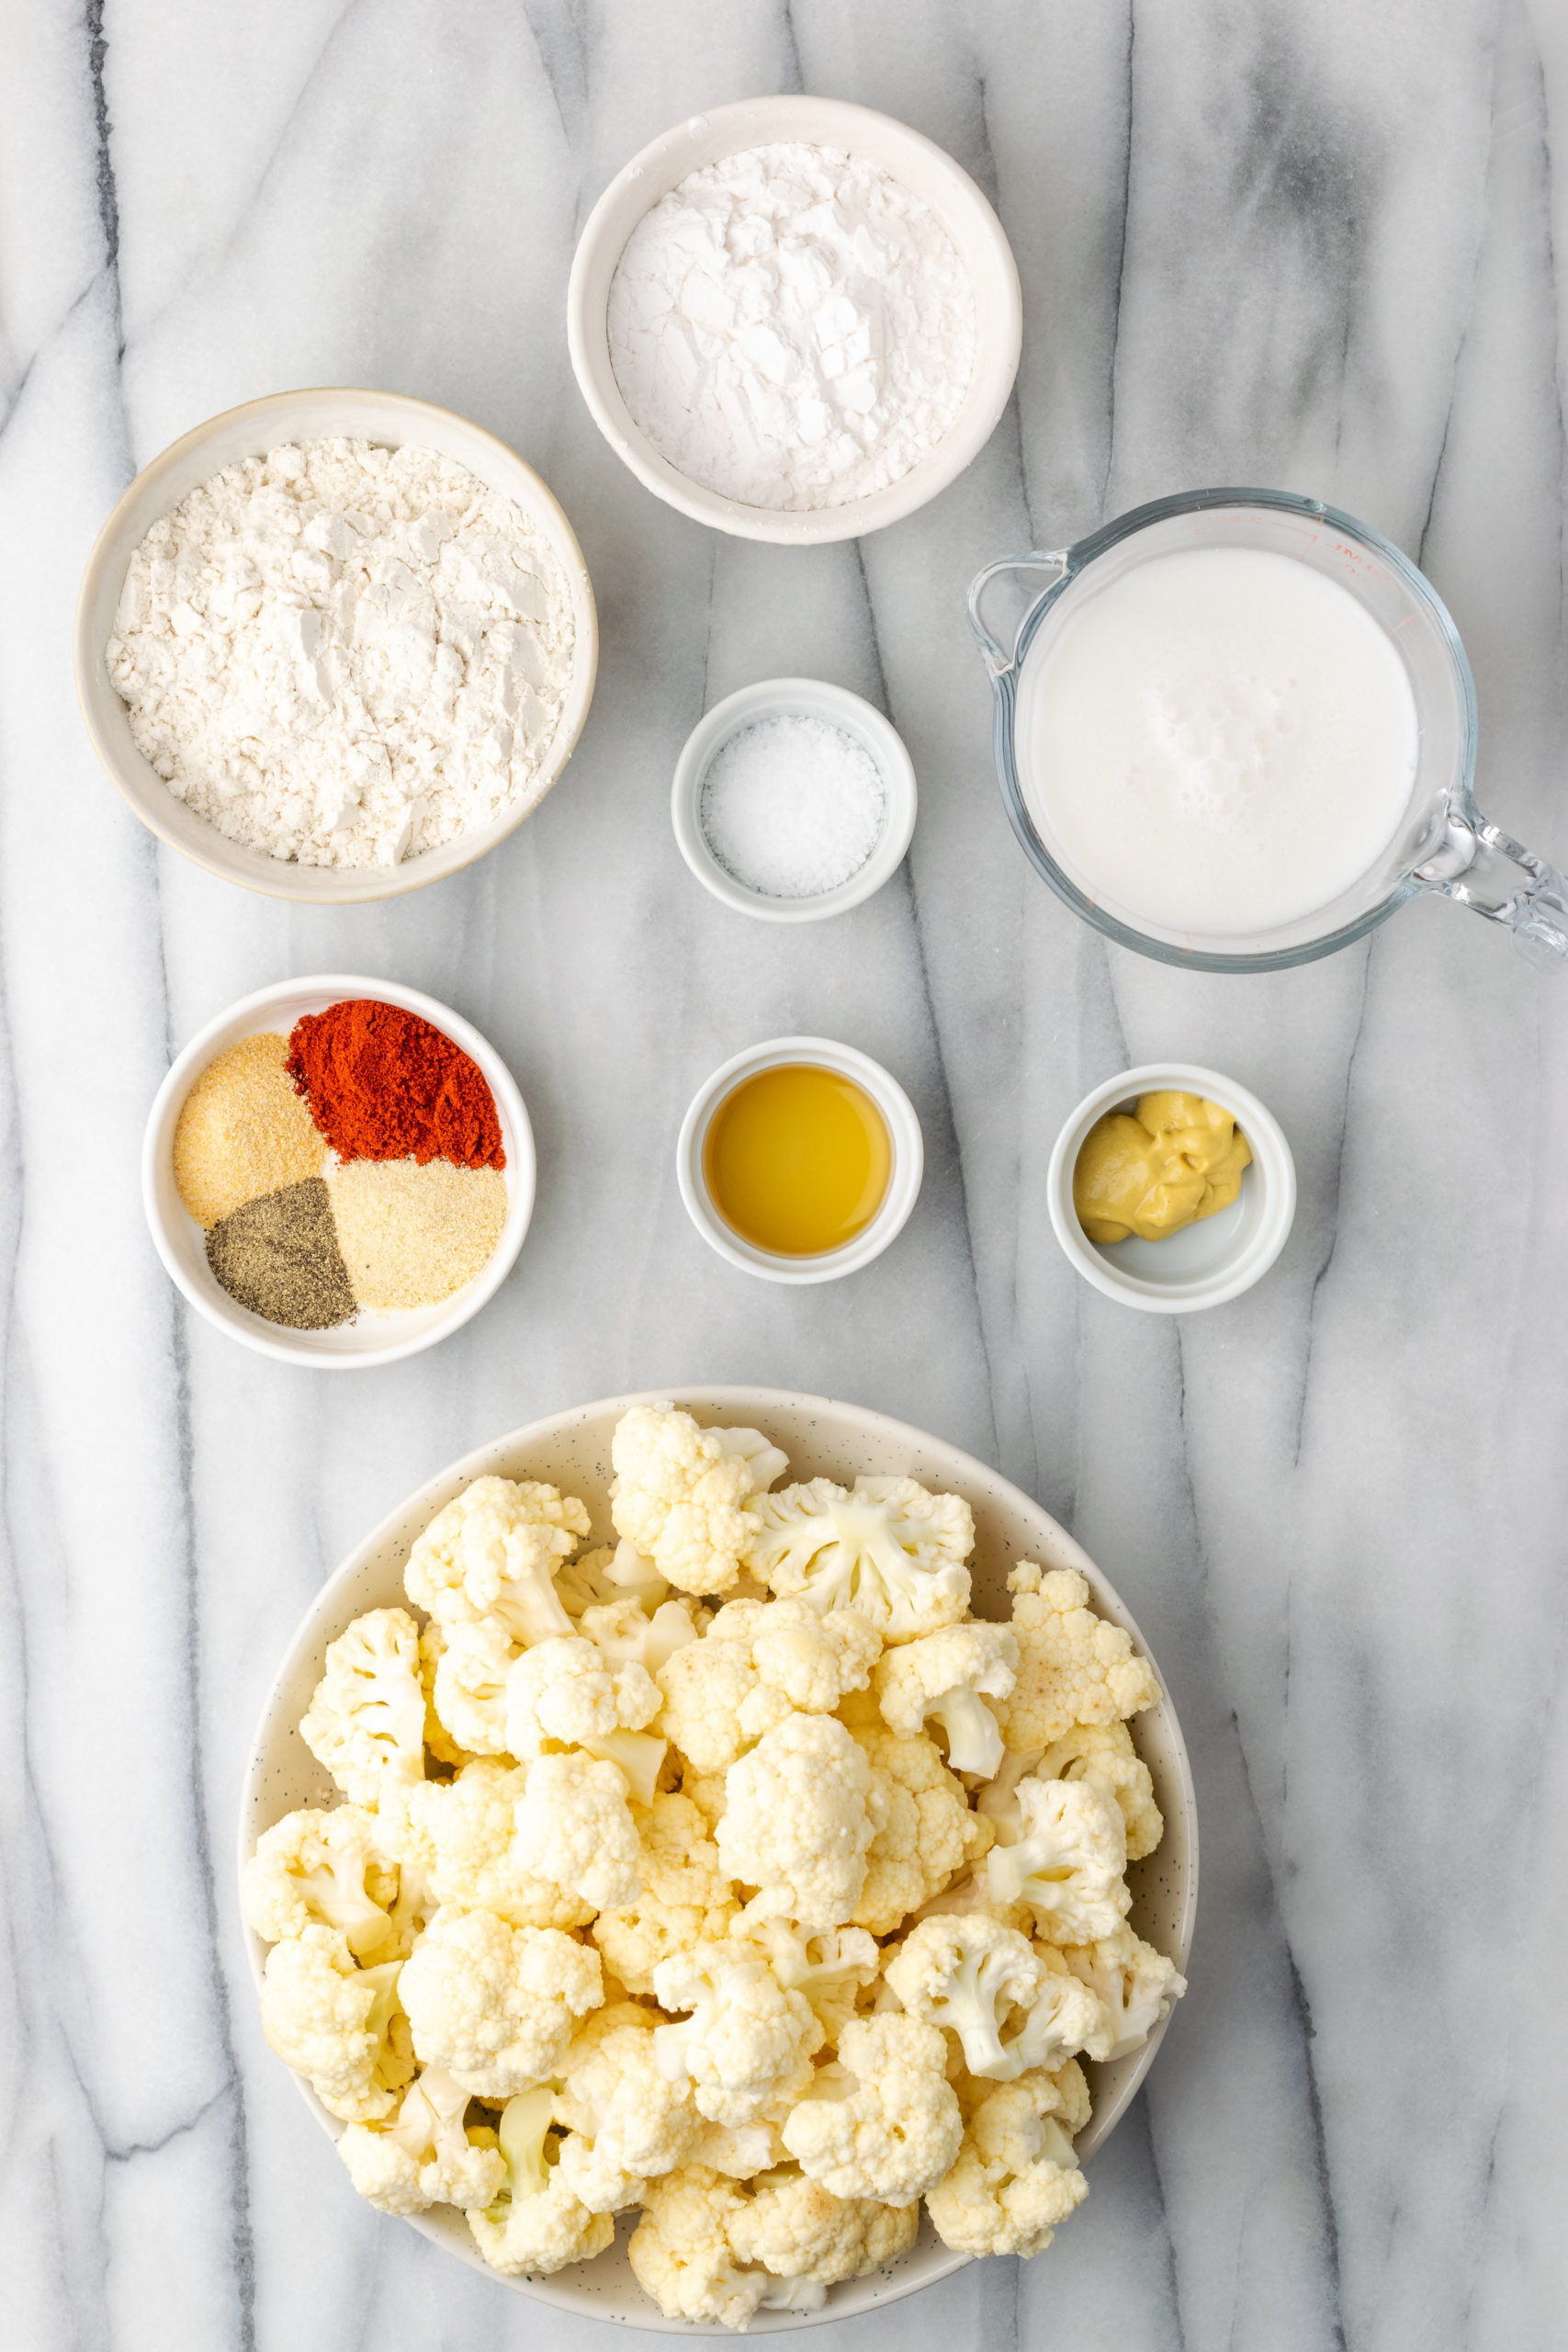 Ingredients for Southern Fried Cauliflower